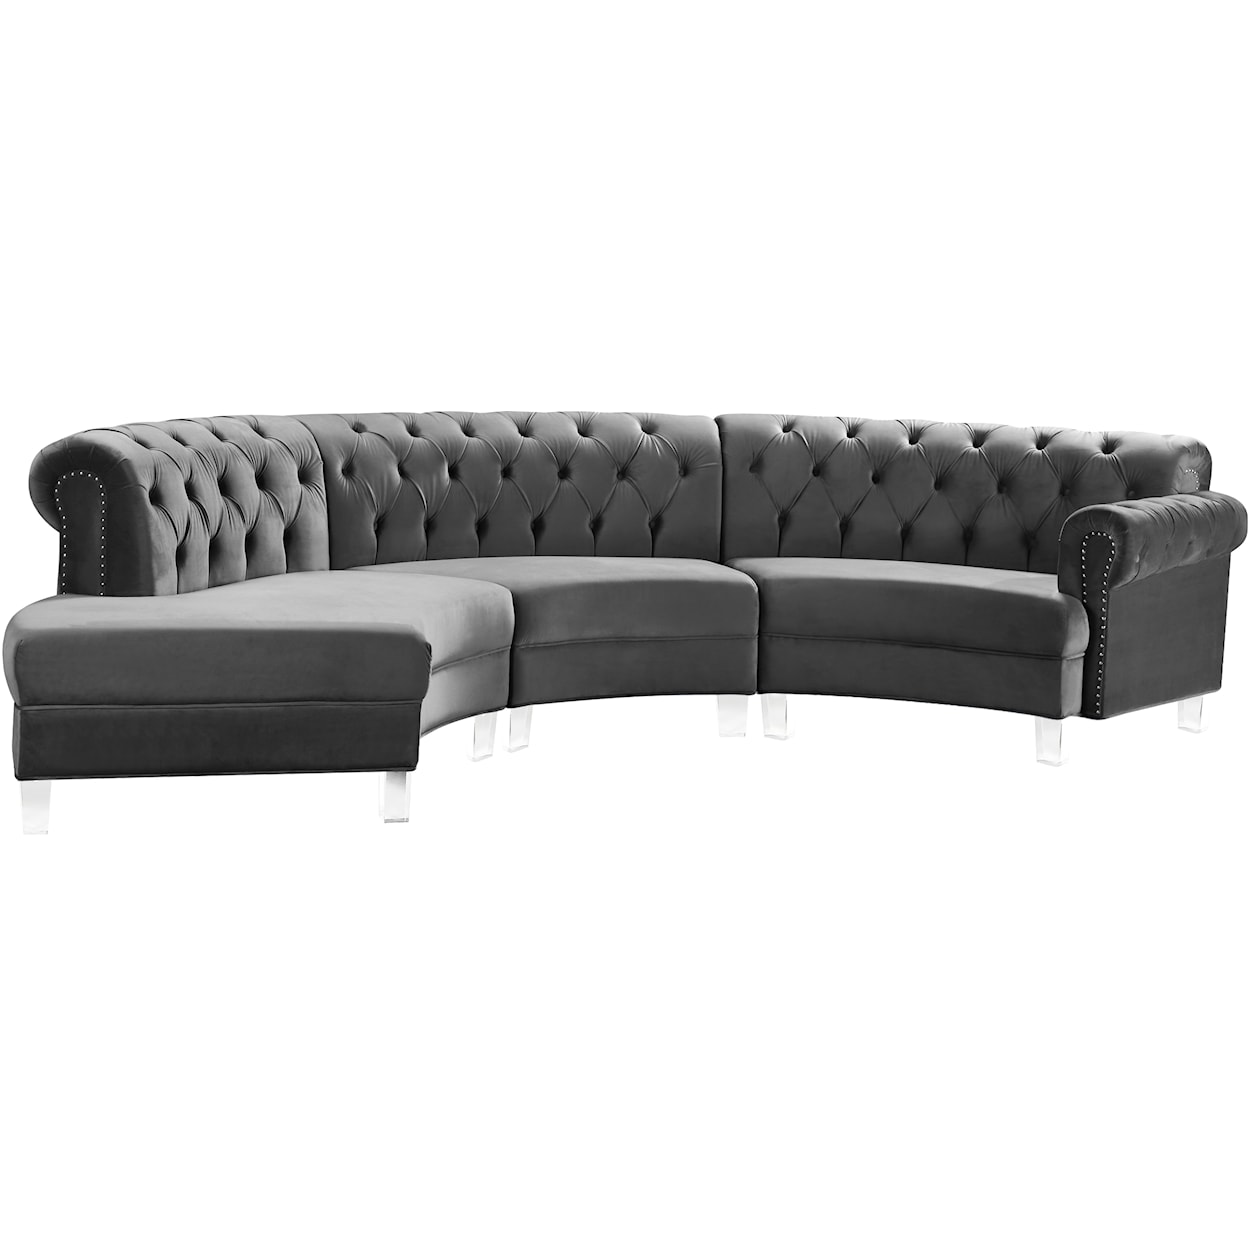 Meridian Furniture Anabella Velvet 3-Piece Sectional with Tufting